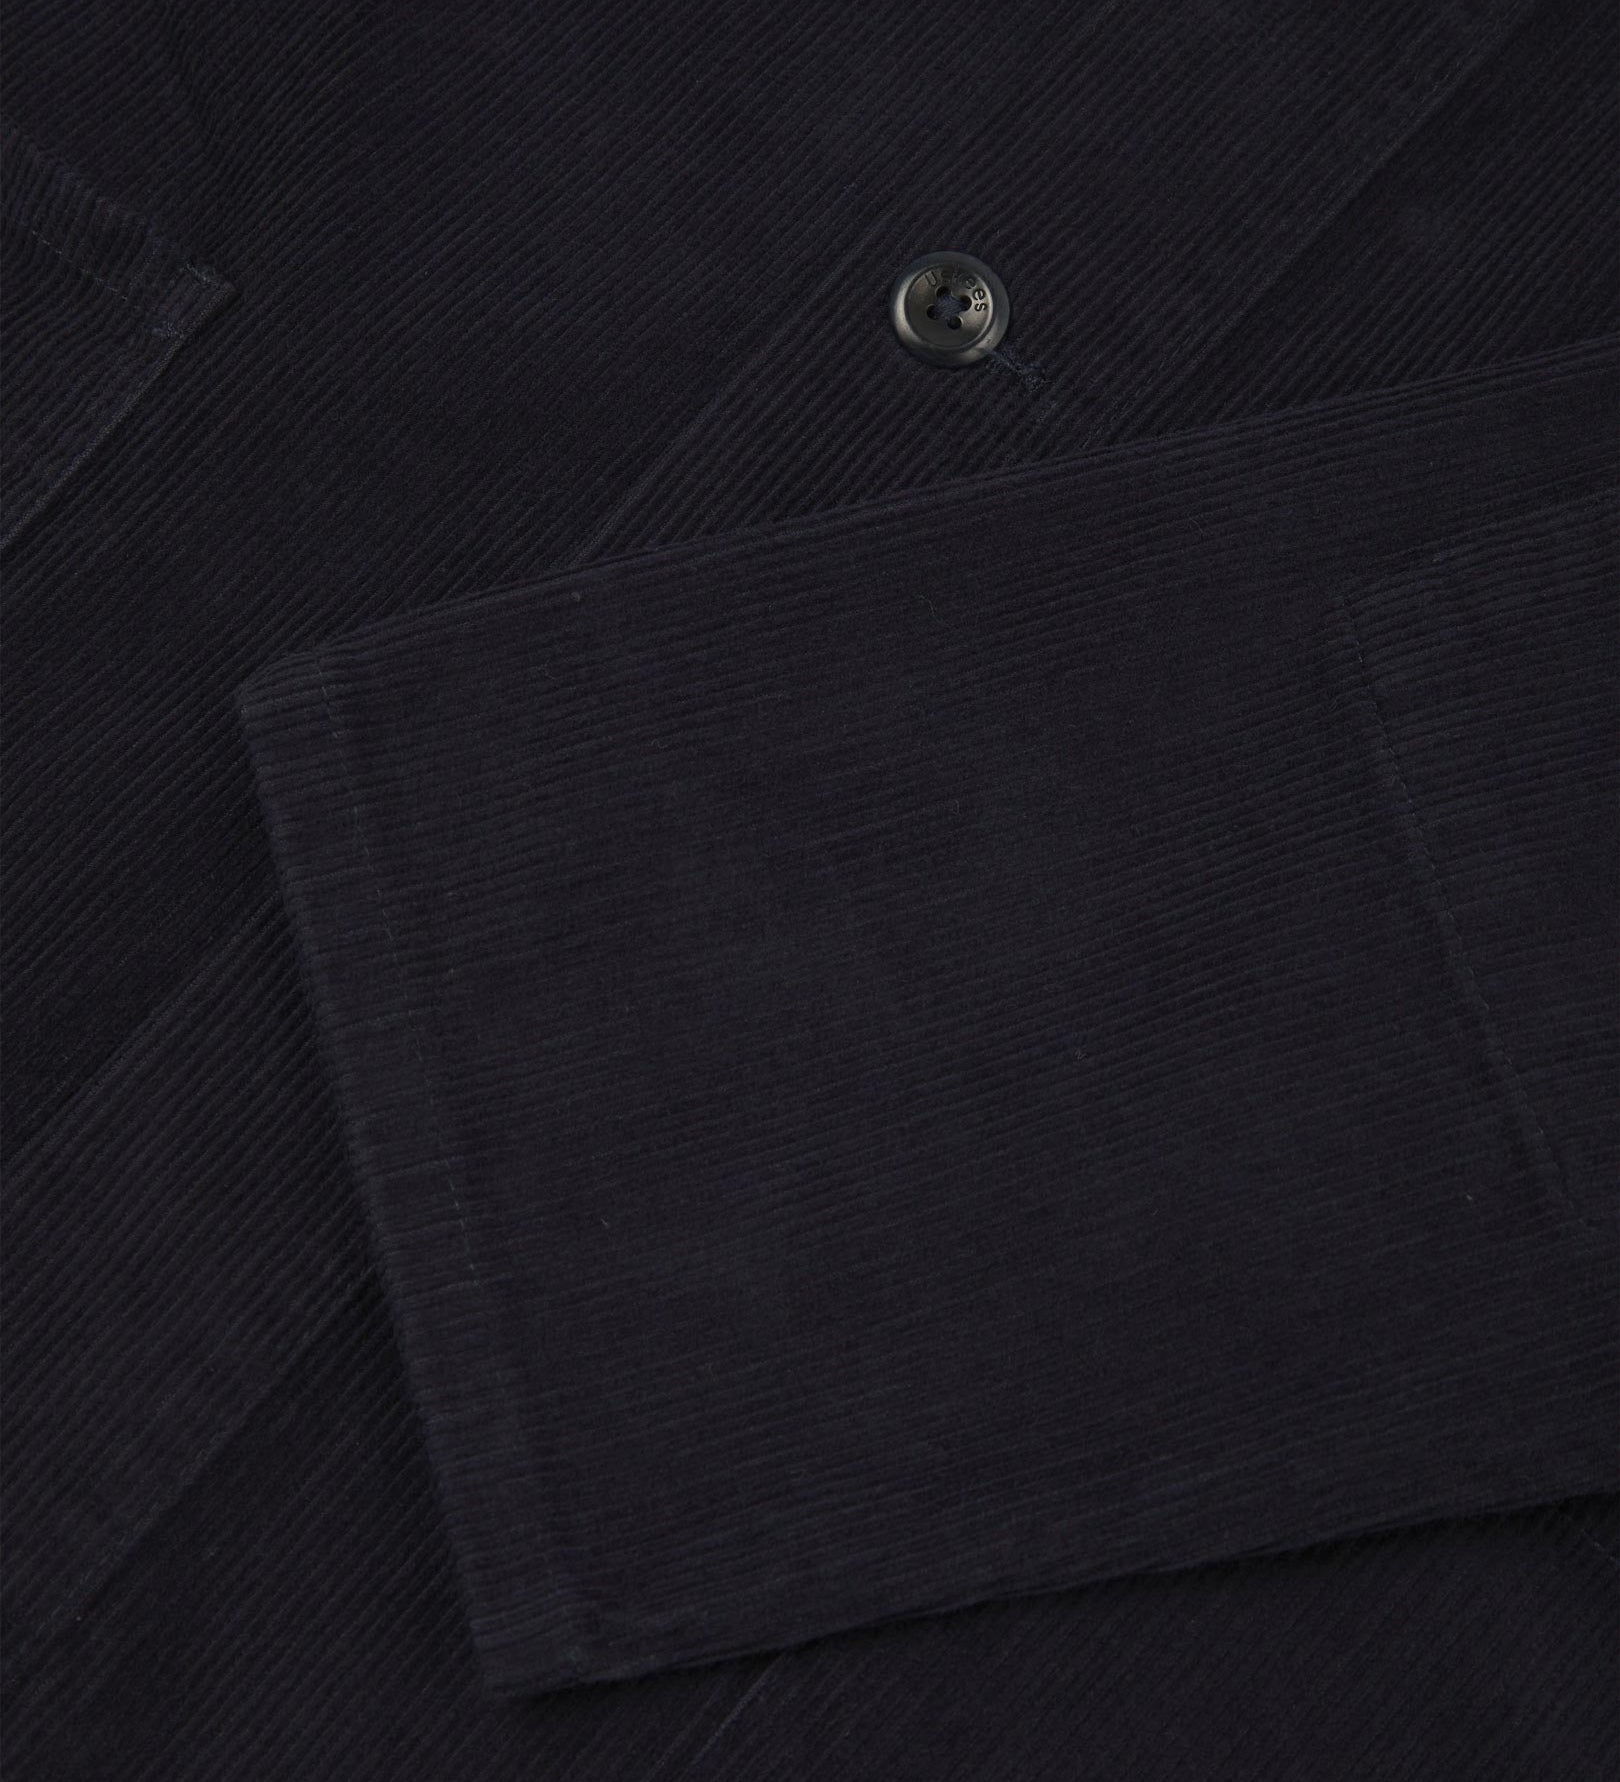 Closer view of mid section of midnight blue, buttoned corduroy overshirt from Uskees. Focus on cuff, pockets, corozo buttons and corduroy texture.